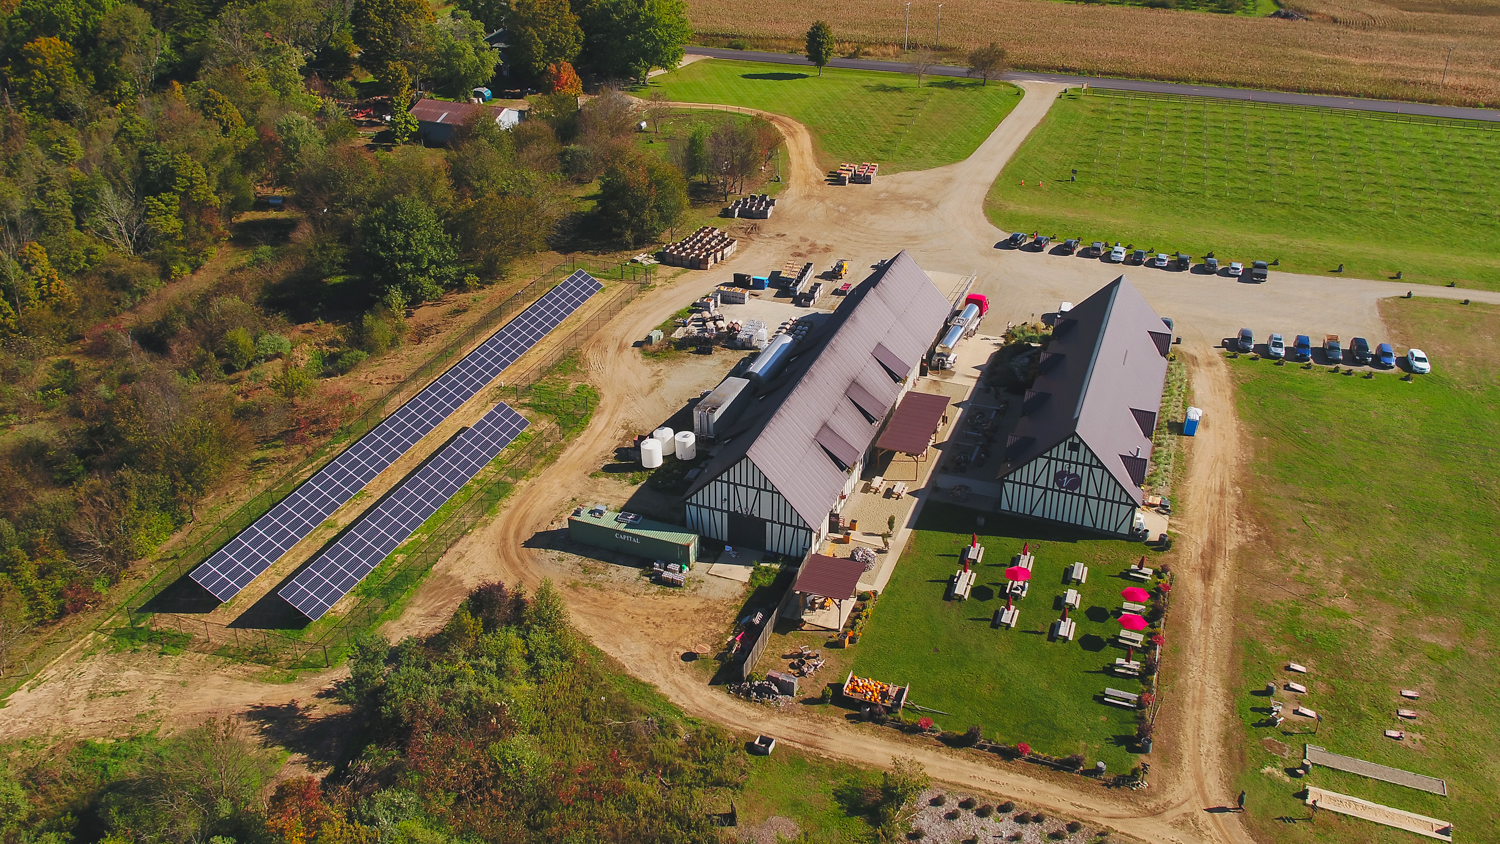 Virtue Cider installs 200 solar panels at orchard - Fruit Growers News